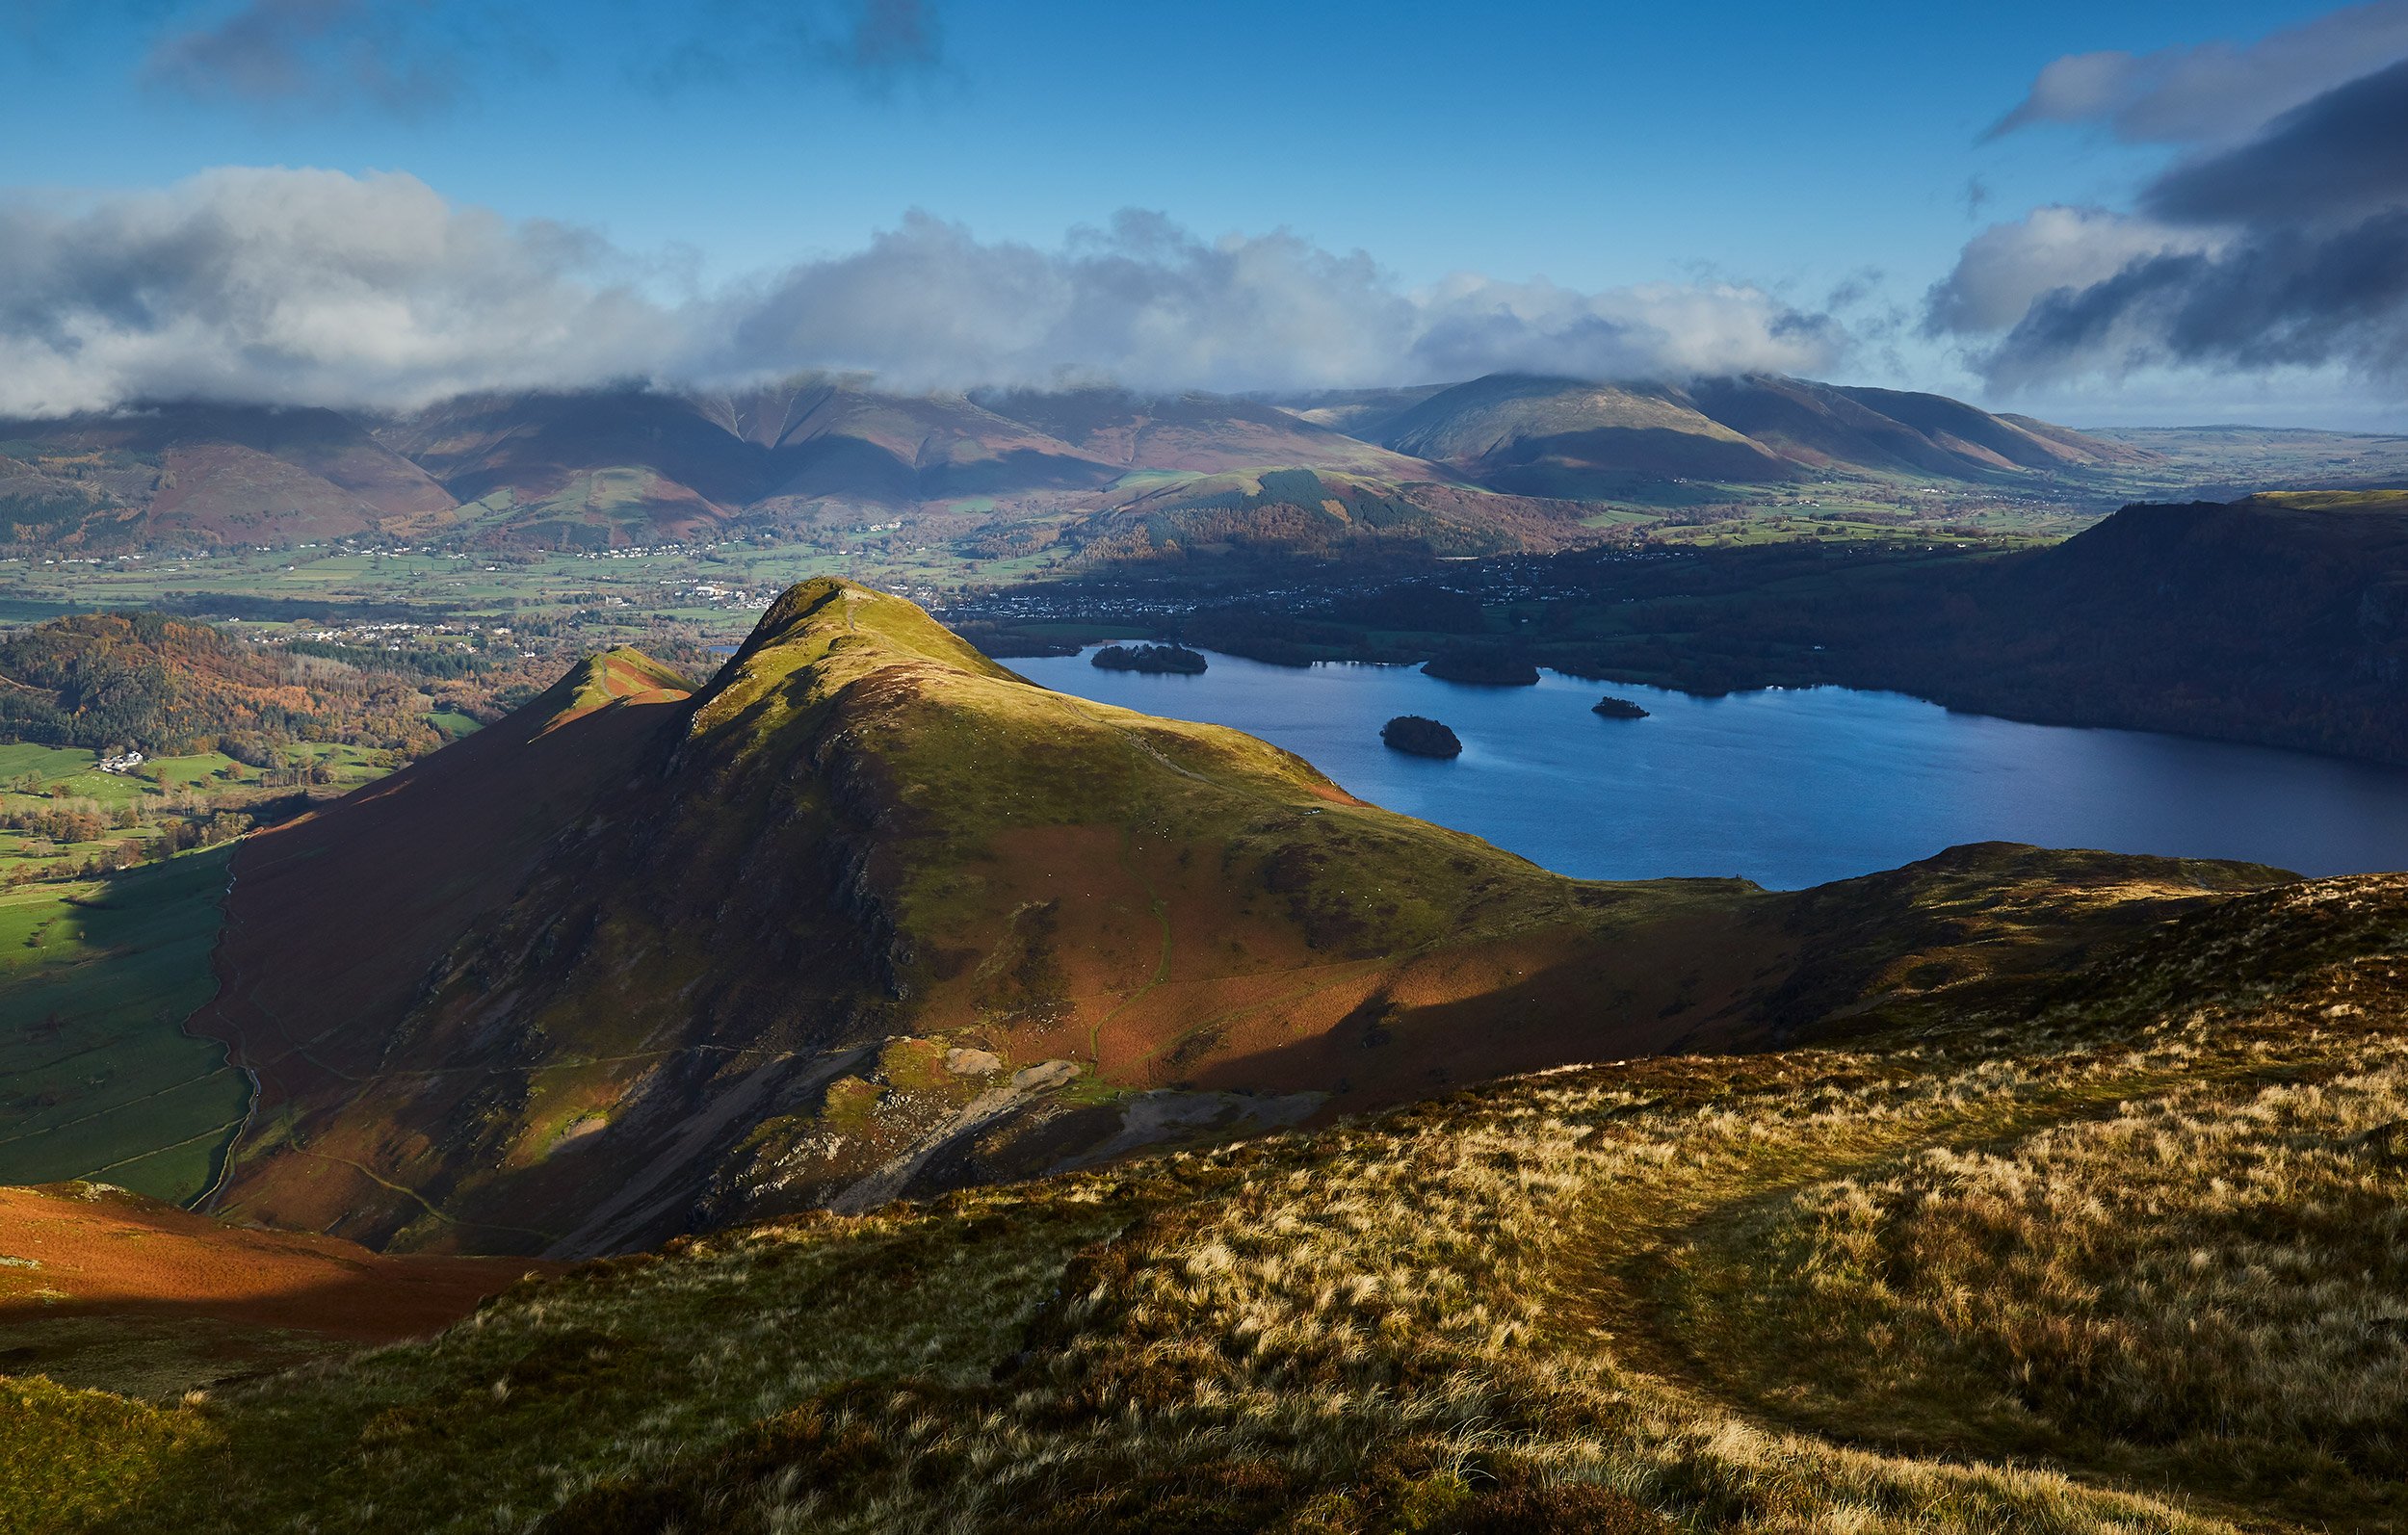 Catbells, Cumbria, UK.  Landscape photography by Mike Caldwell